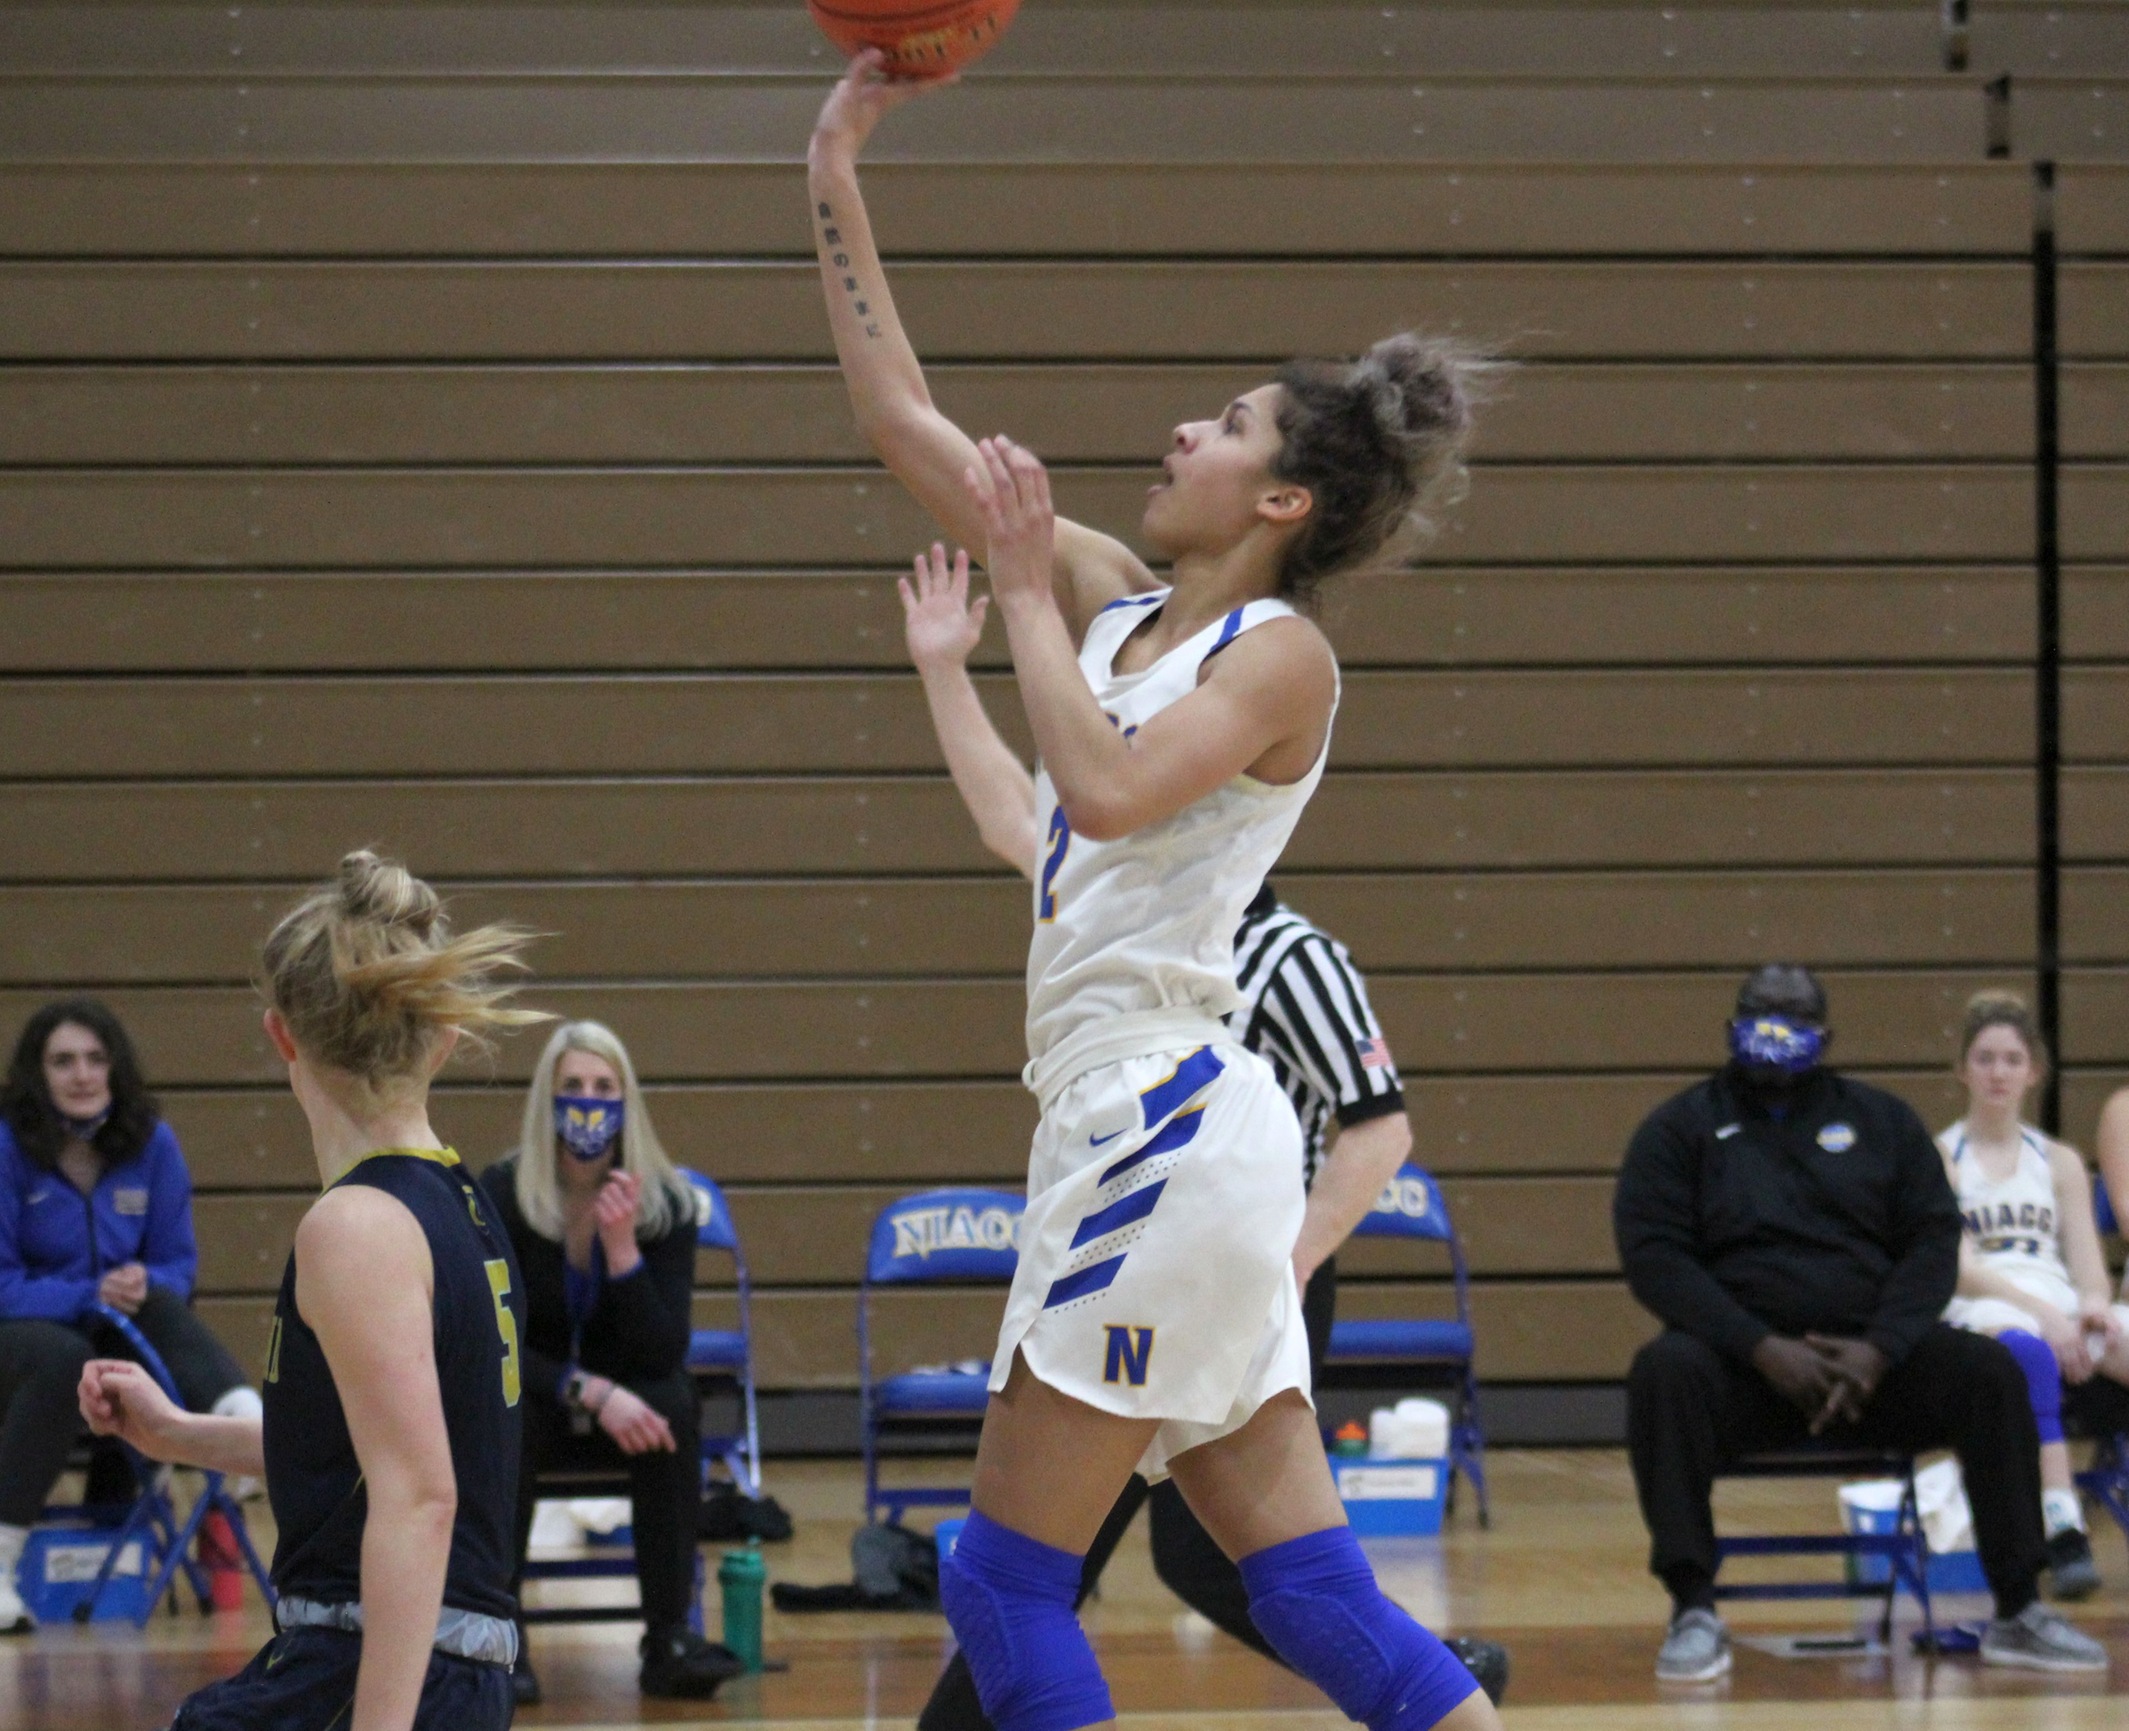 NIACC's Kourtney Manning scored a career-high 25 points in Wednesday's 82-68 win over the Graceland University JV.